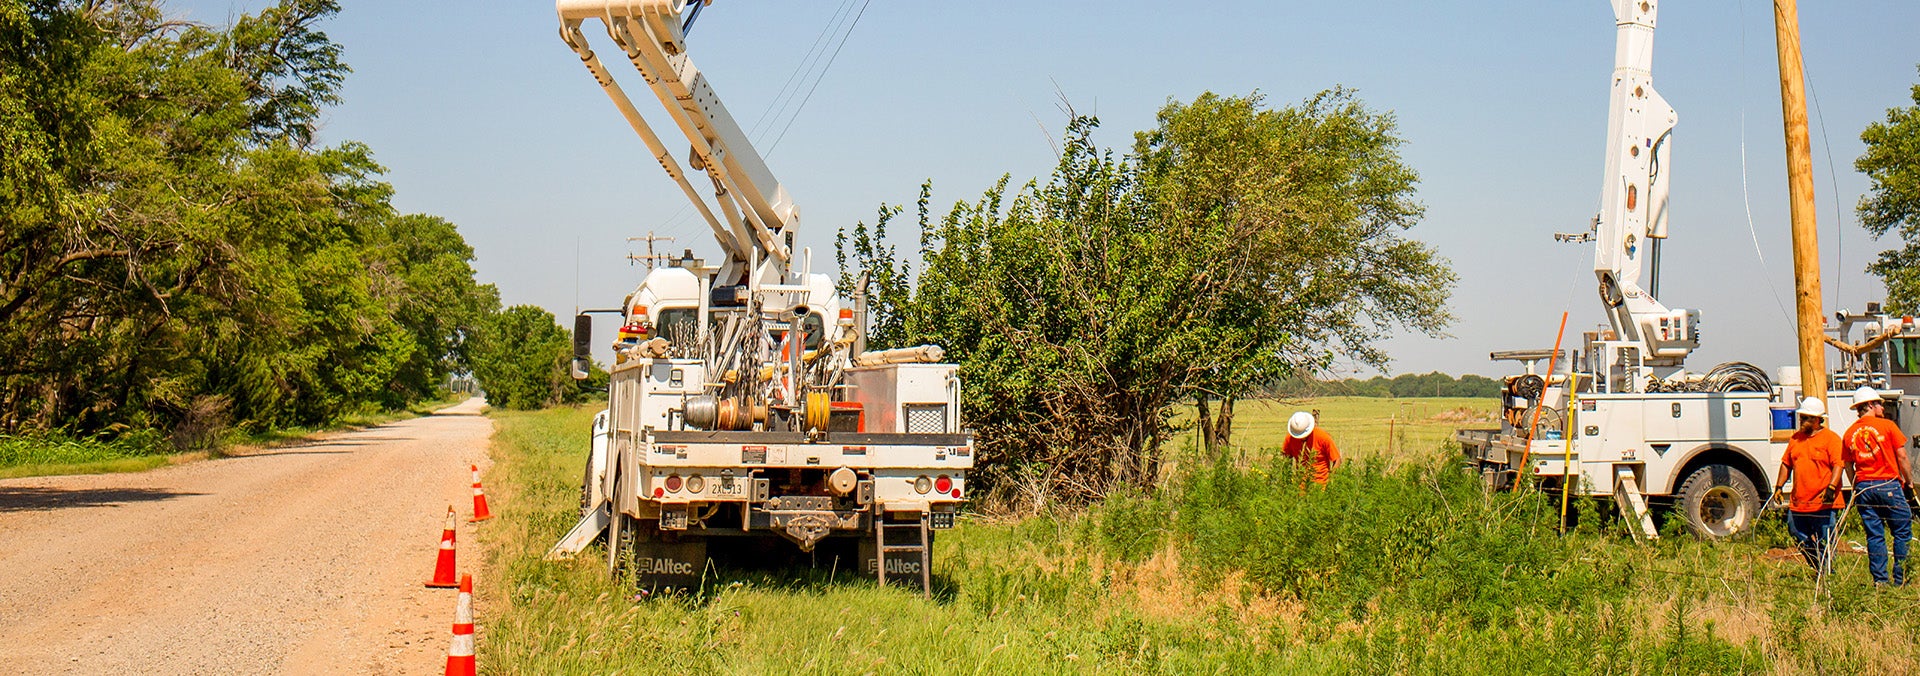 Electric utility trucks at the side of a dirt road